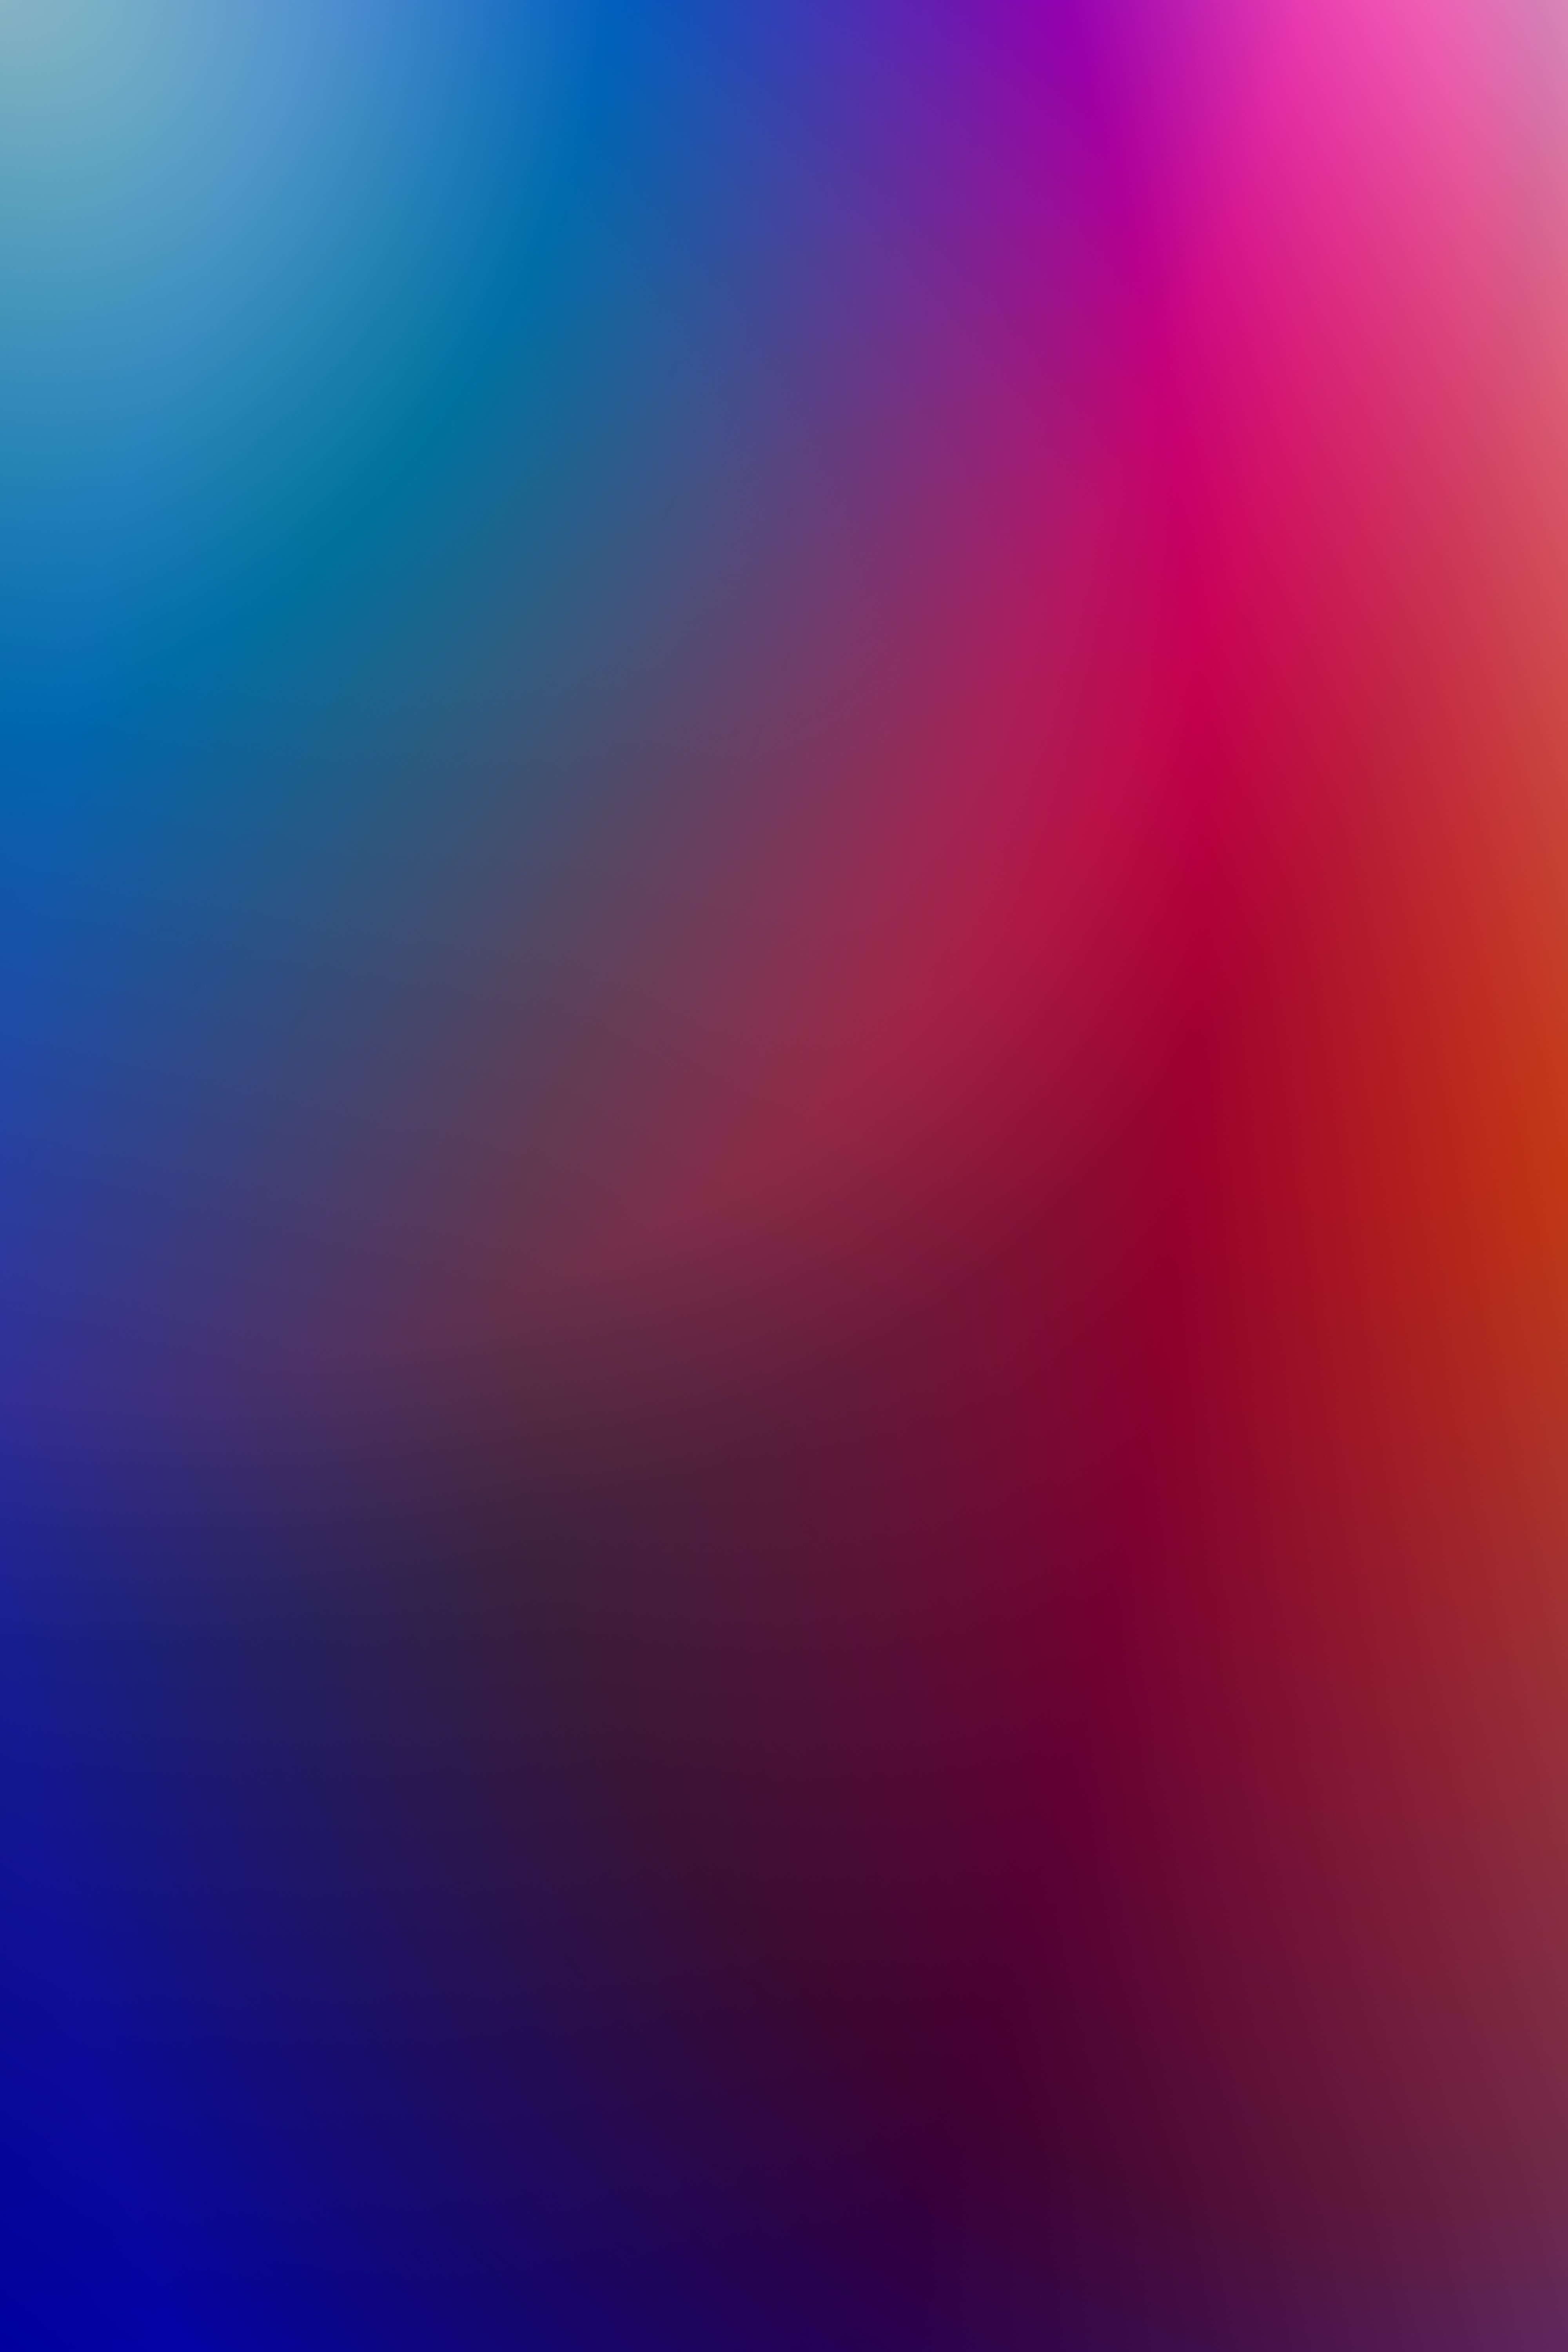 Full HD stains, abstract, multicolored, motley, spots, gradient